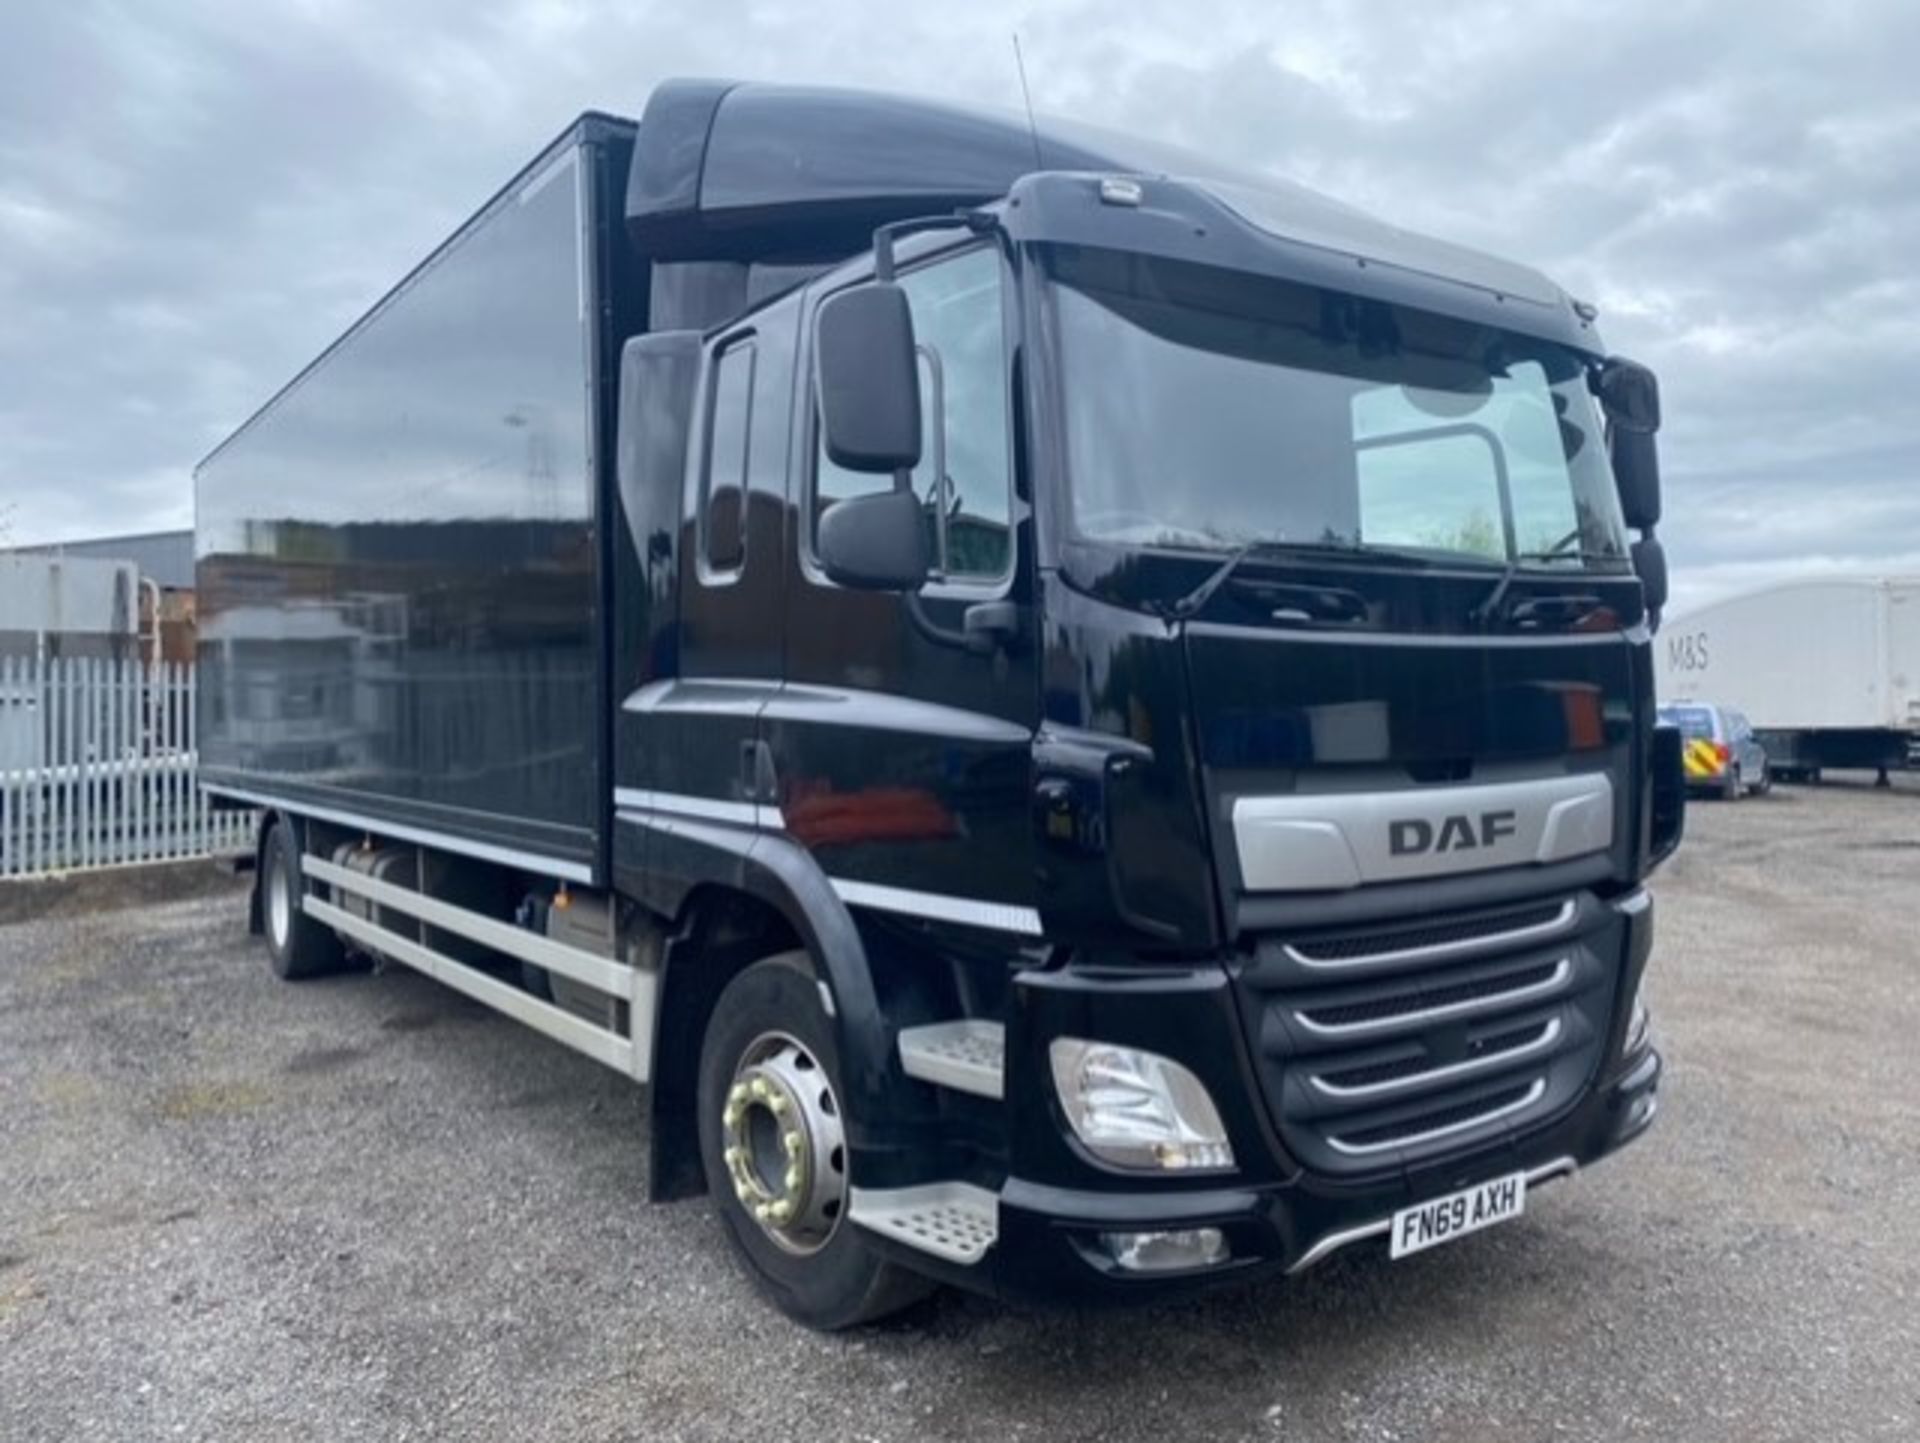 2019, DAF CF 260 FA (Ex-Fleet Owned & Maintained) - FN69 AXH (18 Ton Rigid Truck with Tail Lift) - Image 20 of 22